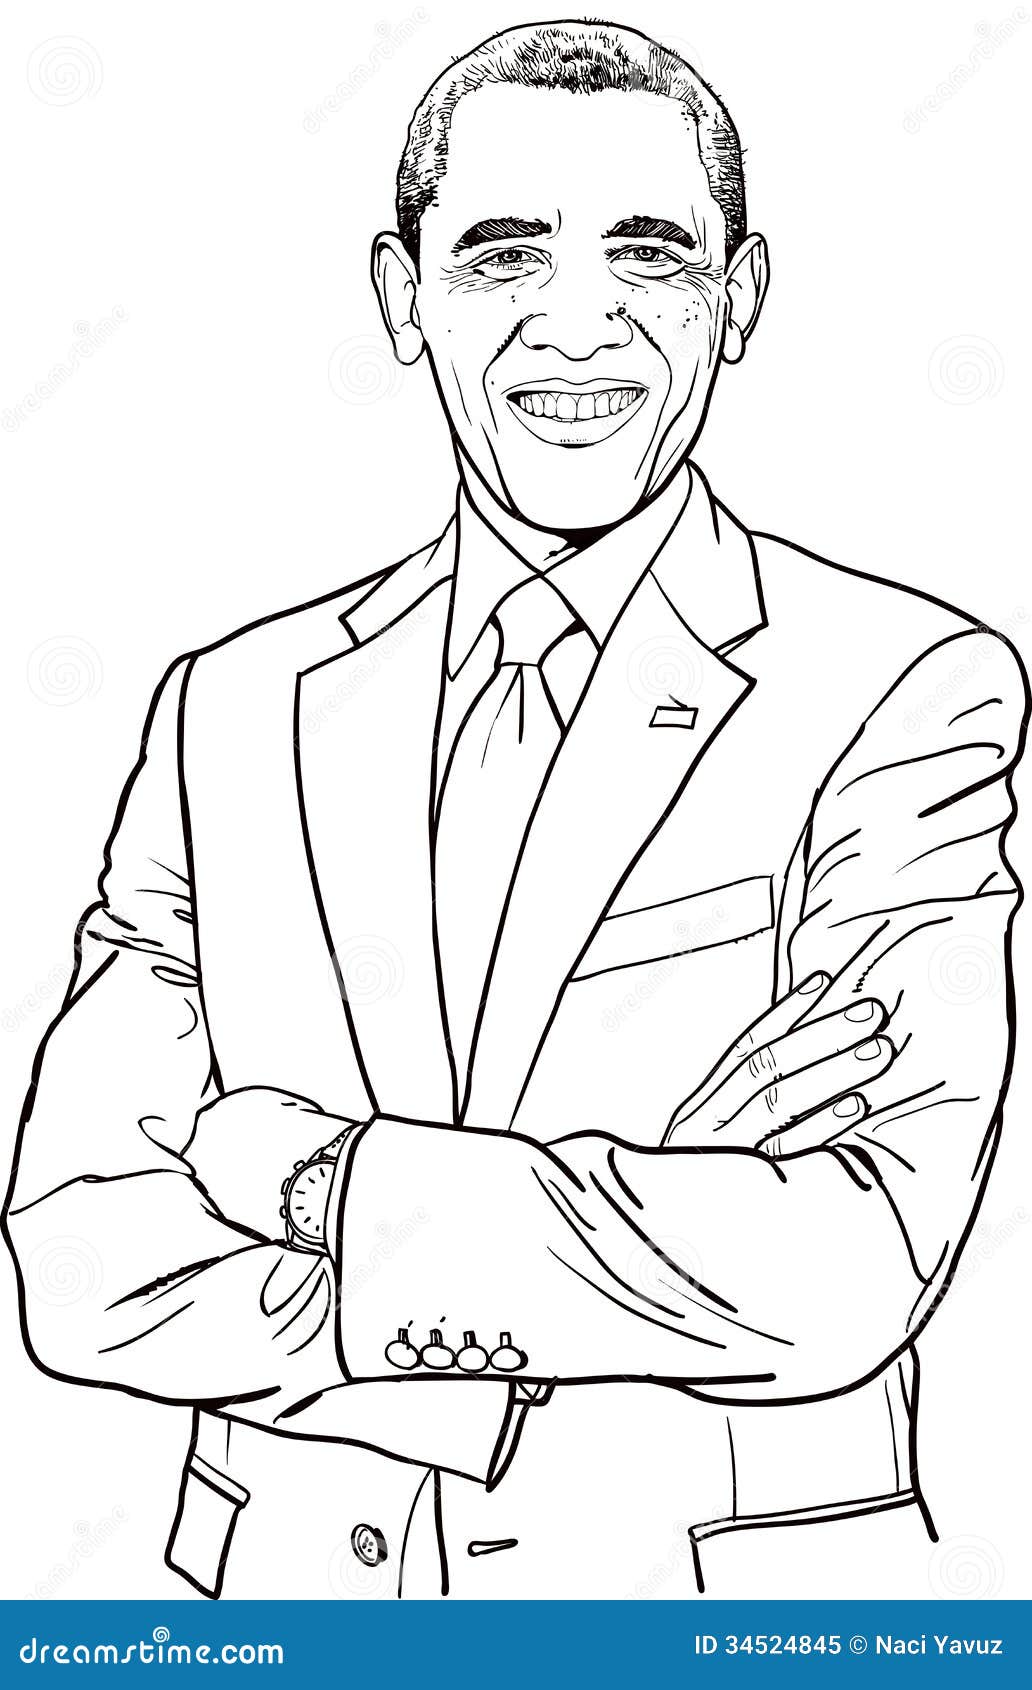 obama and family coloring pages - photo #38